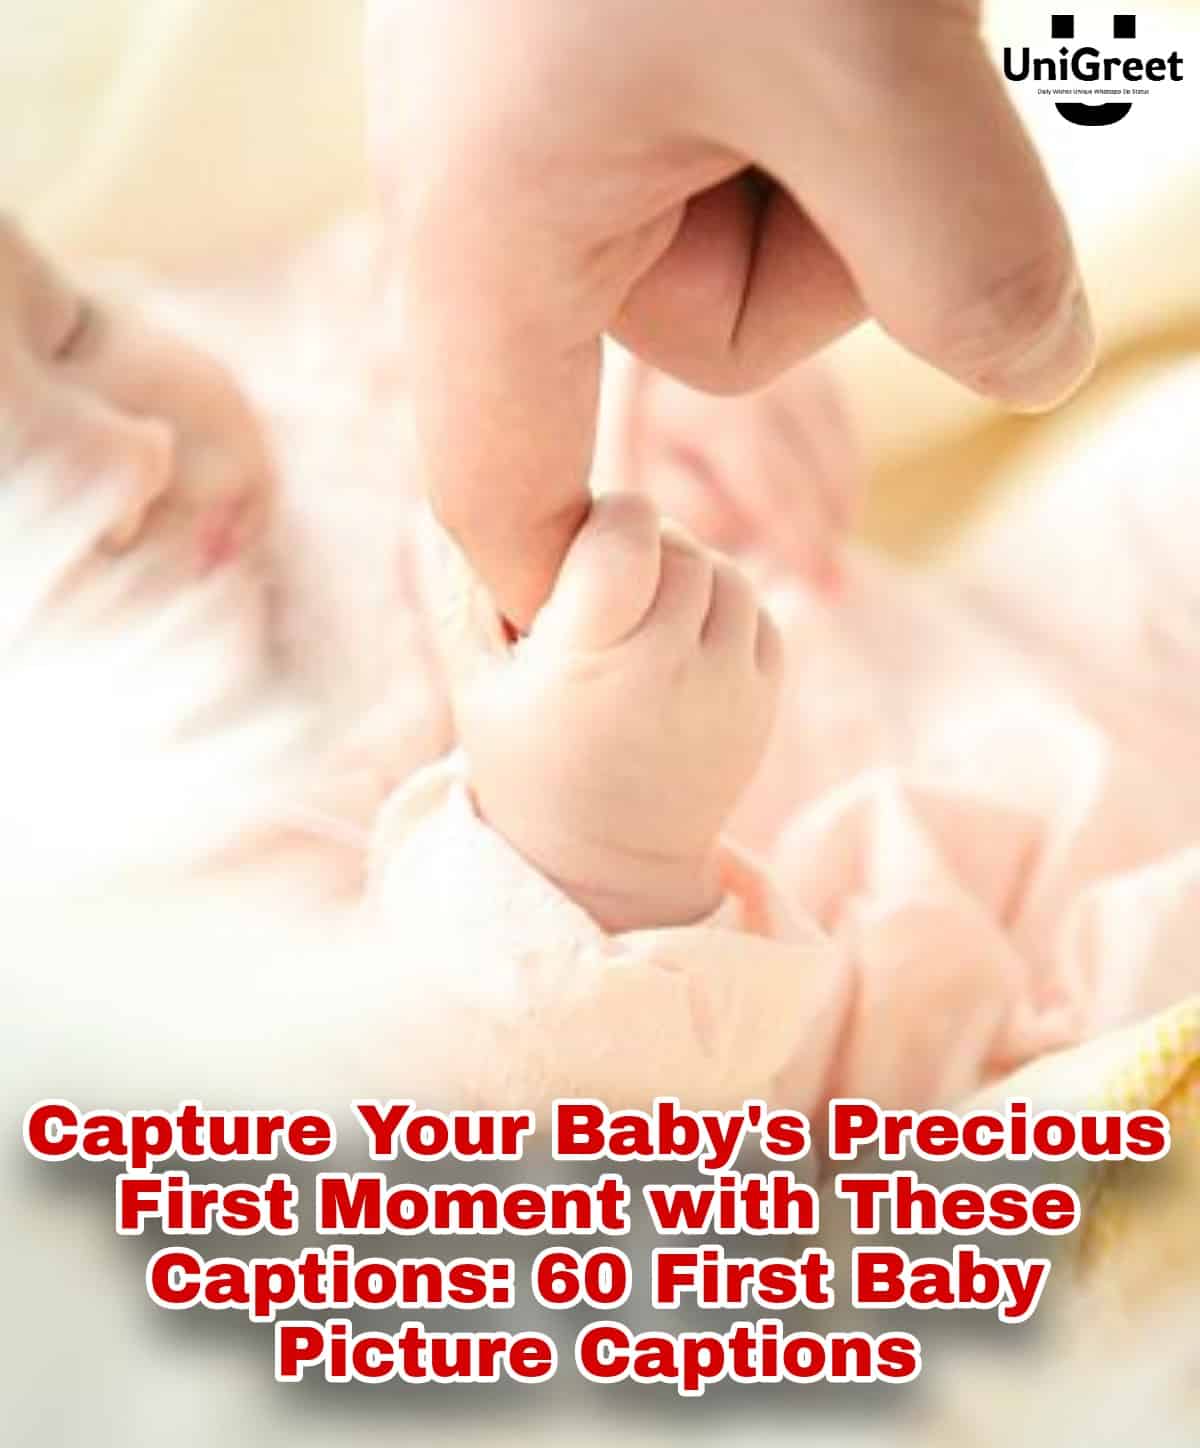 60 Heartwarming First Baby Picture Captions to Cherish Forever